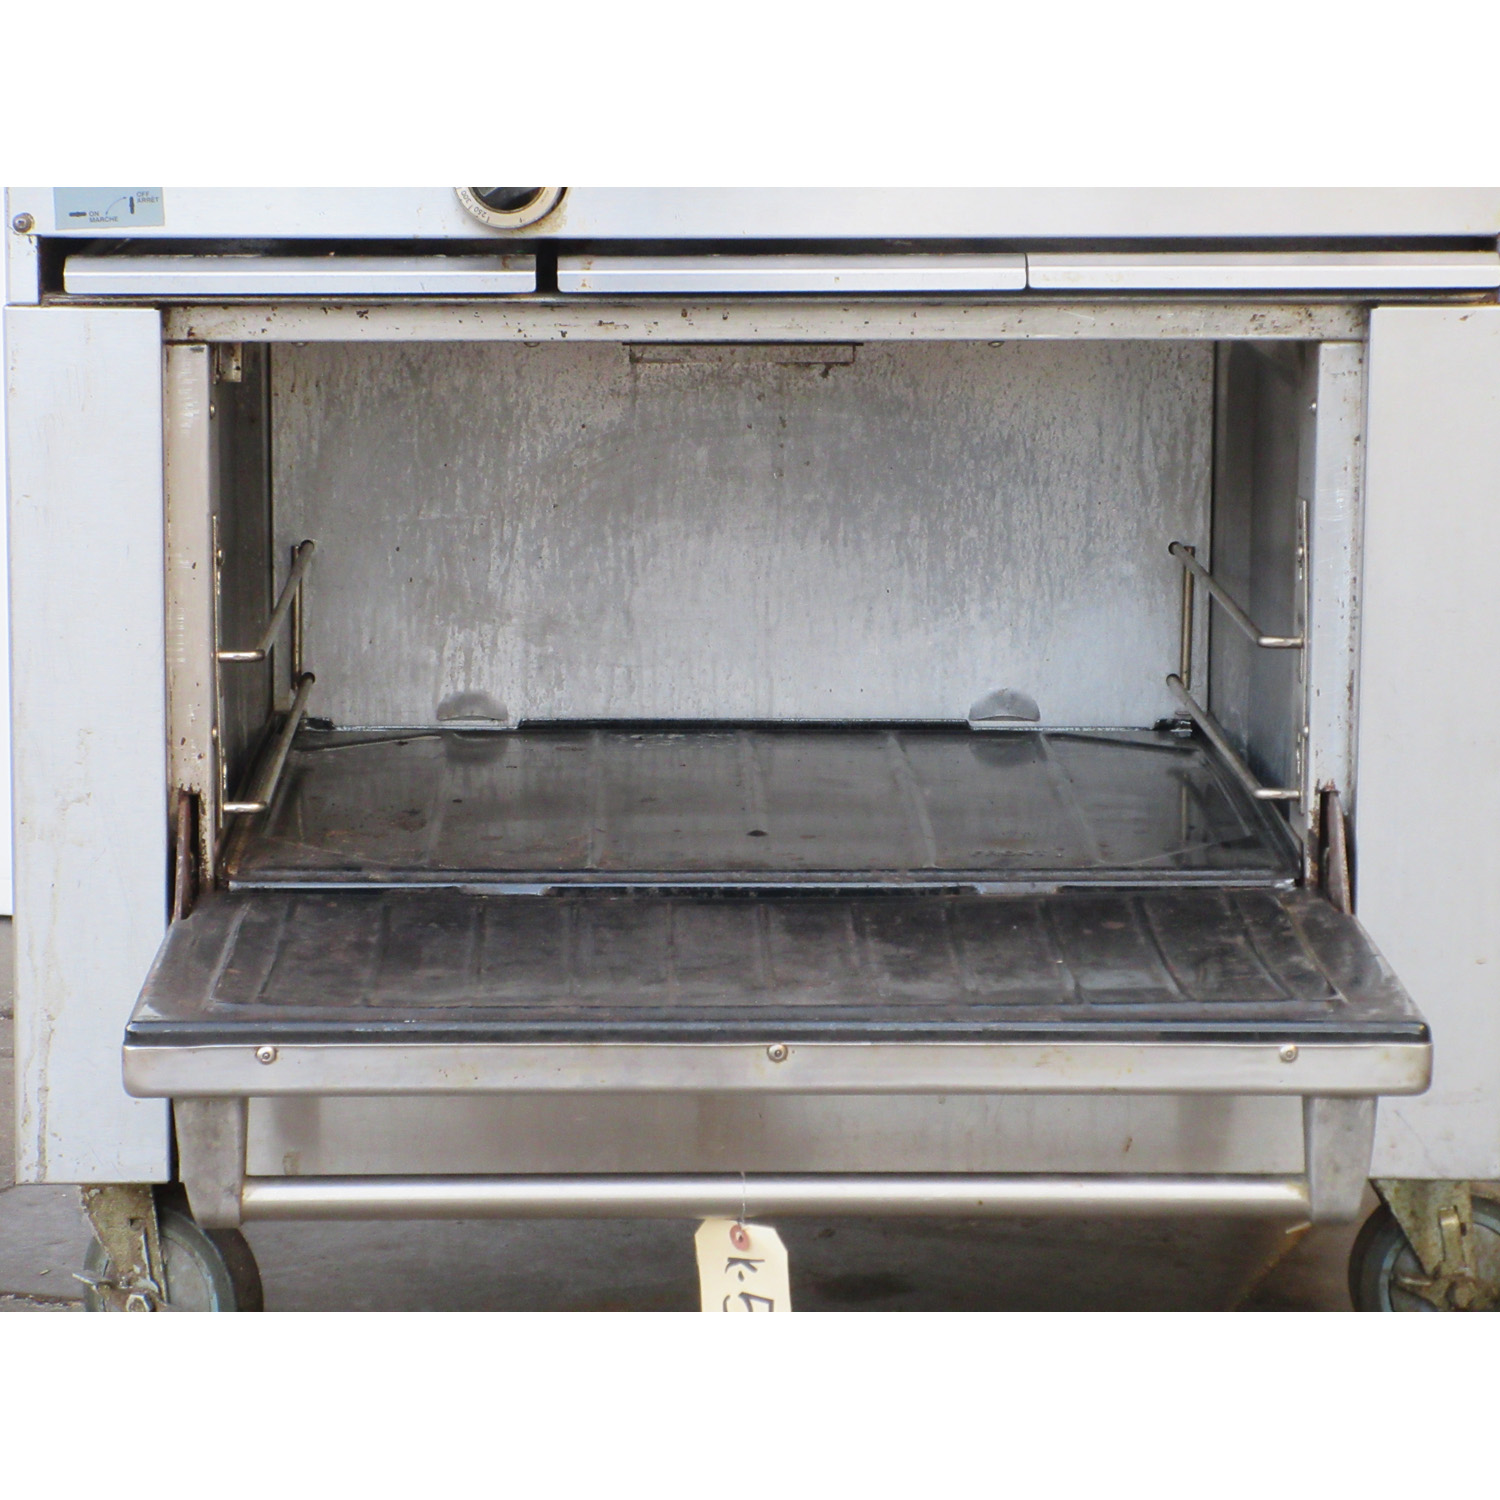 Garland X36-6R 6 Burner Natural Gas Range with Standard Oven, Used Very Good Condition image 3